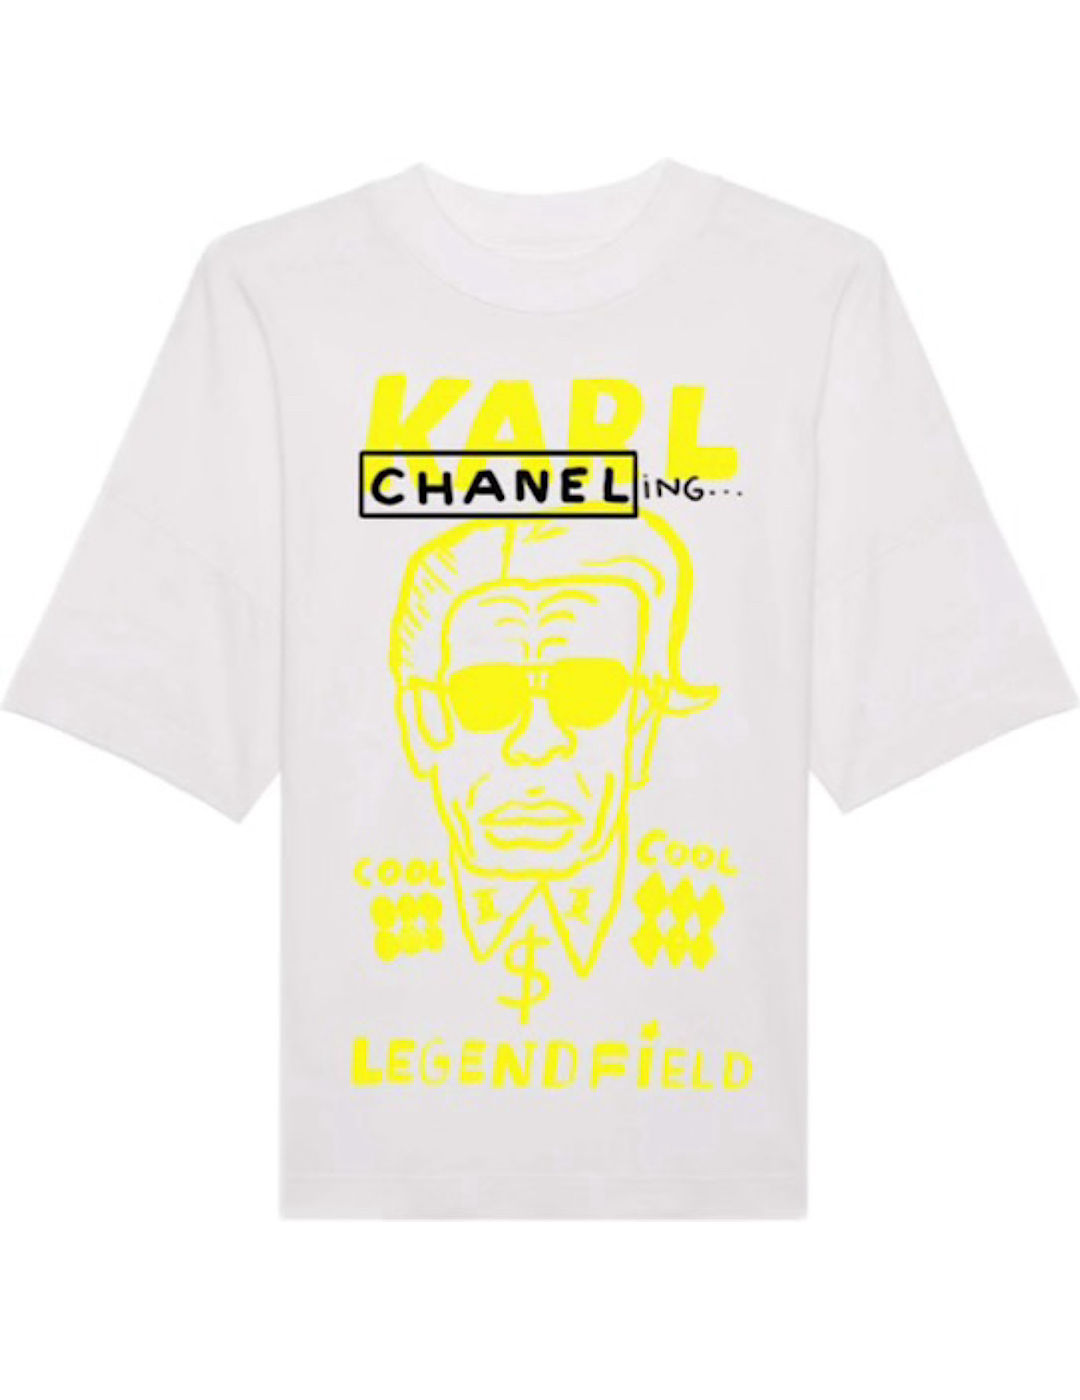 <img class='new_mark_img1' src='https://img.shop-pro.jp/img/new/icons47.gif' style='border:none;display:inline;margin:0px;padding:0px;width:auto;' />EGYBOY / T-SHIRT